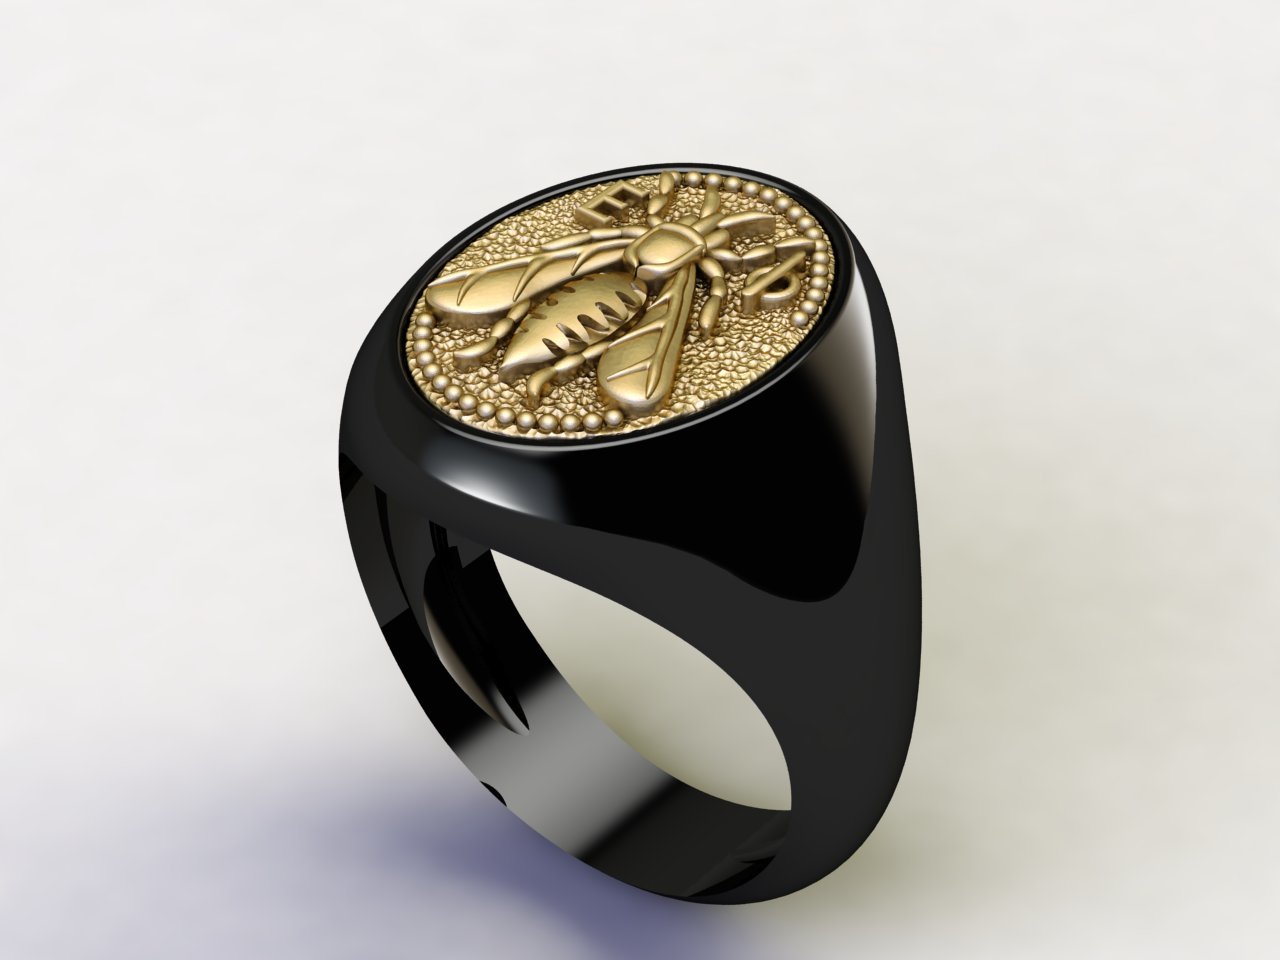 Ancient Coins Jewelry Collection